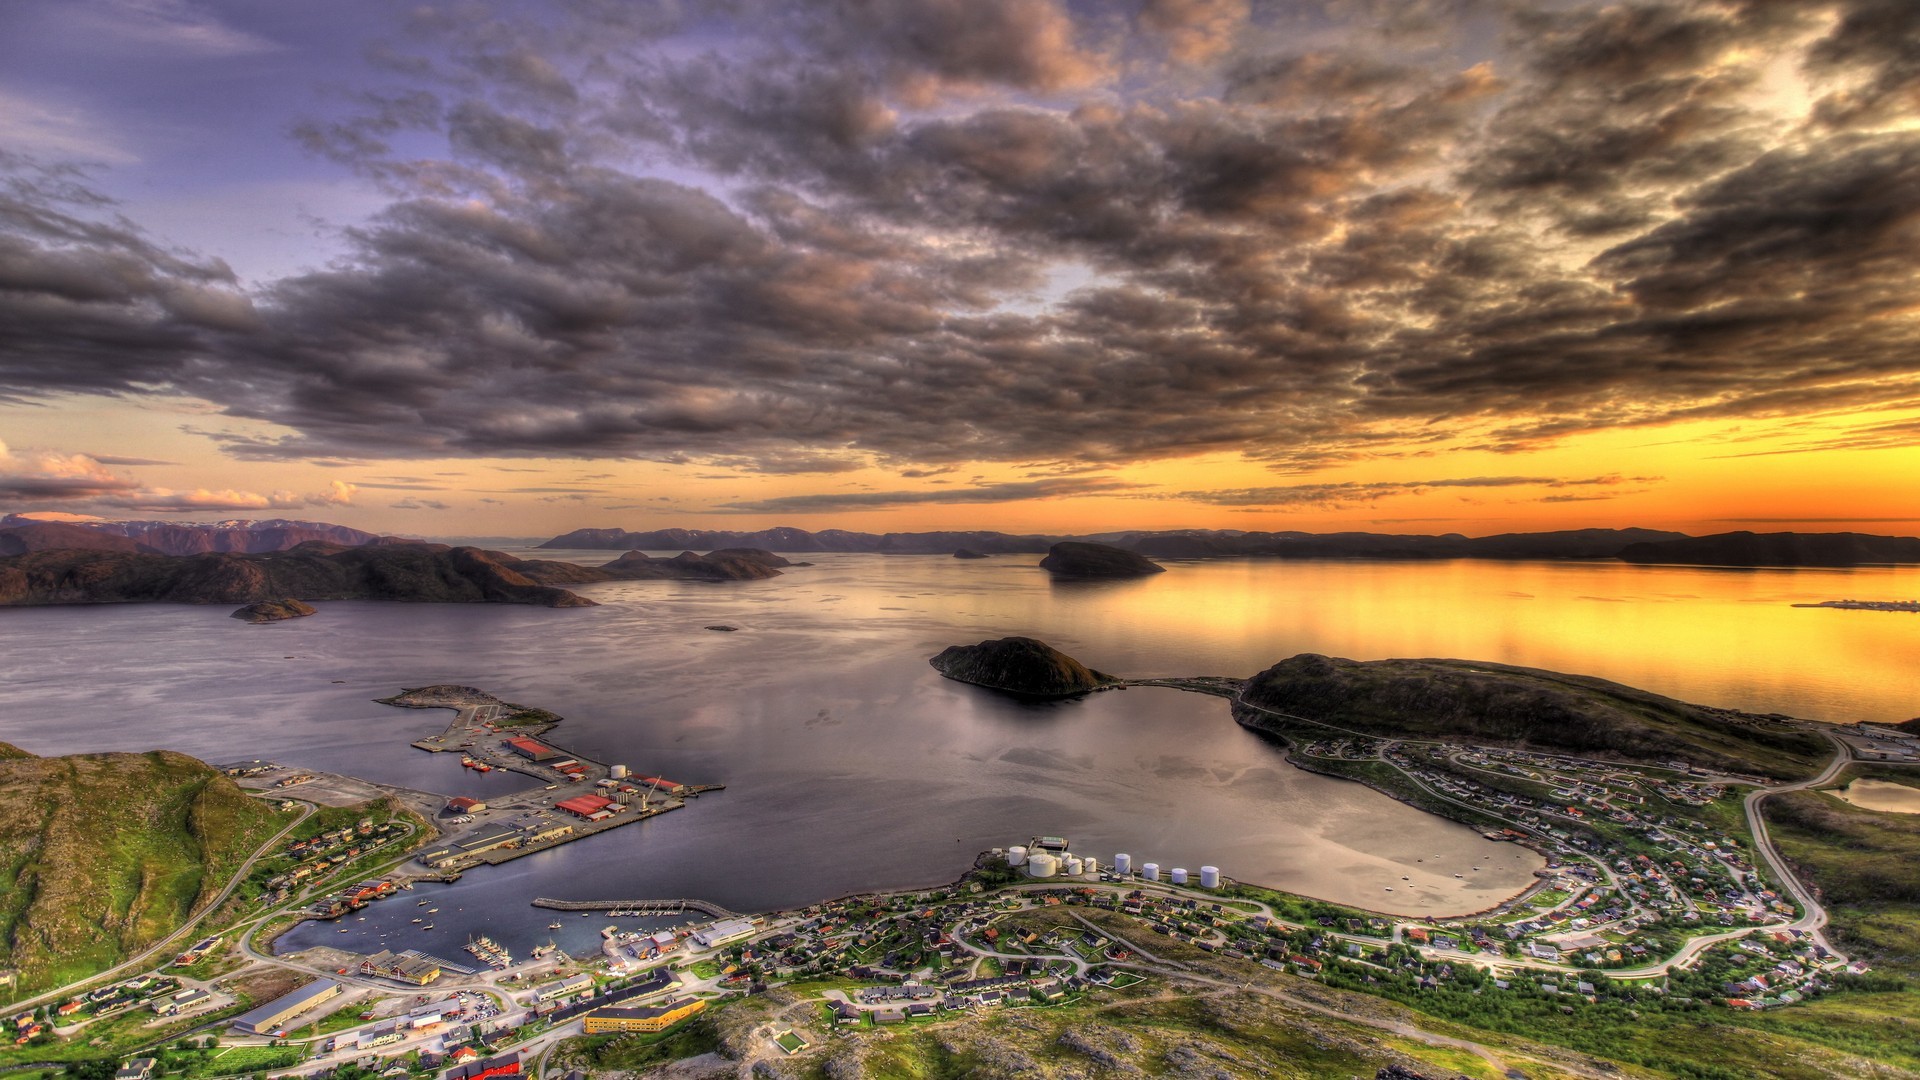 General 1920x1080 nature sunset sky HDR Norway